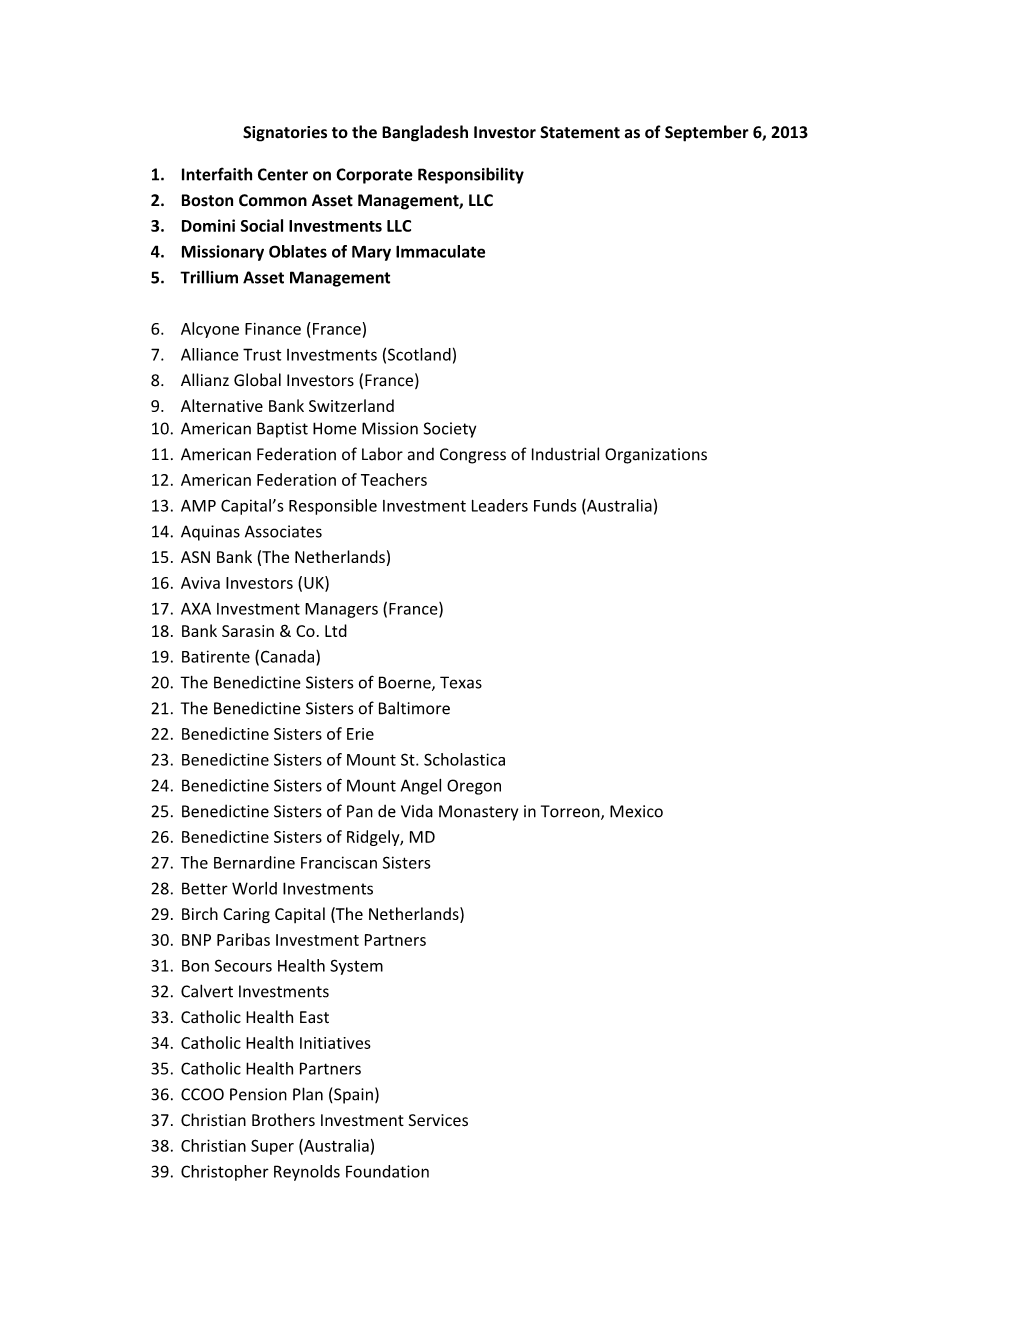 Signatories to the Bangladesh Investor Statement As of September 6, 2013